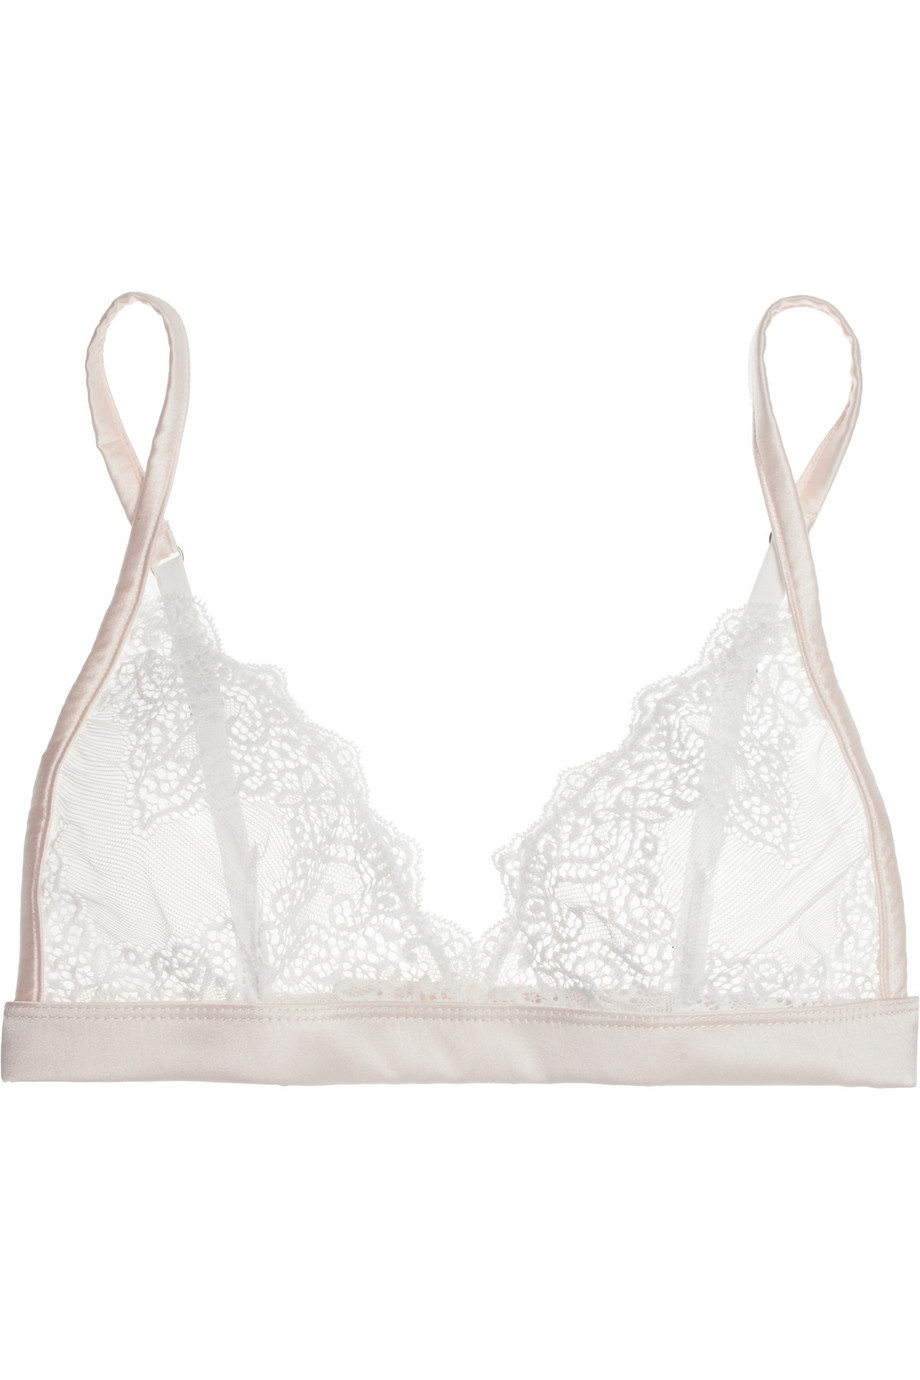 Mimi holliday by damaris Mr Whippy Stretch-Lace And Silk-Satin Soft-Cup ...